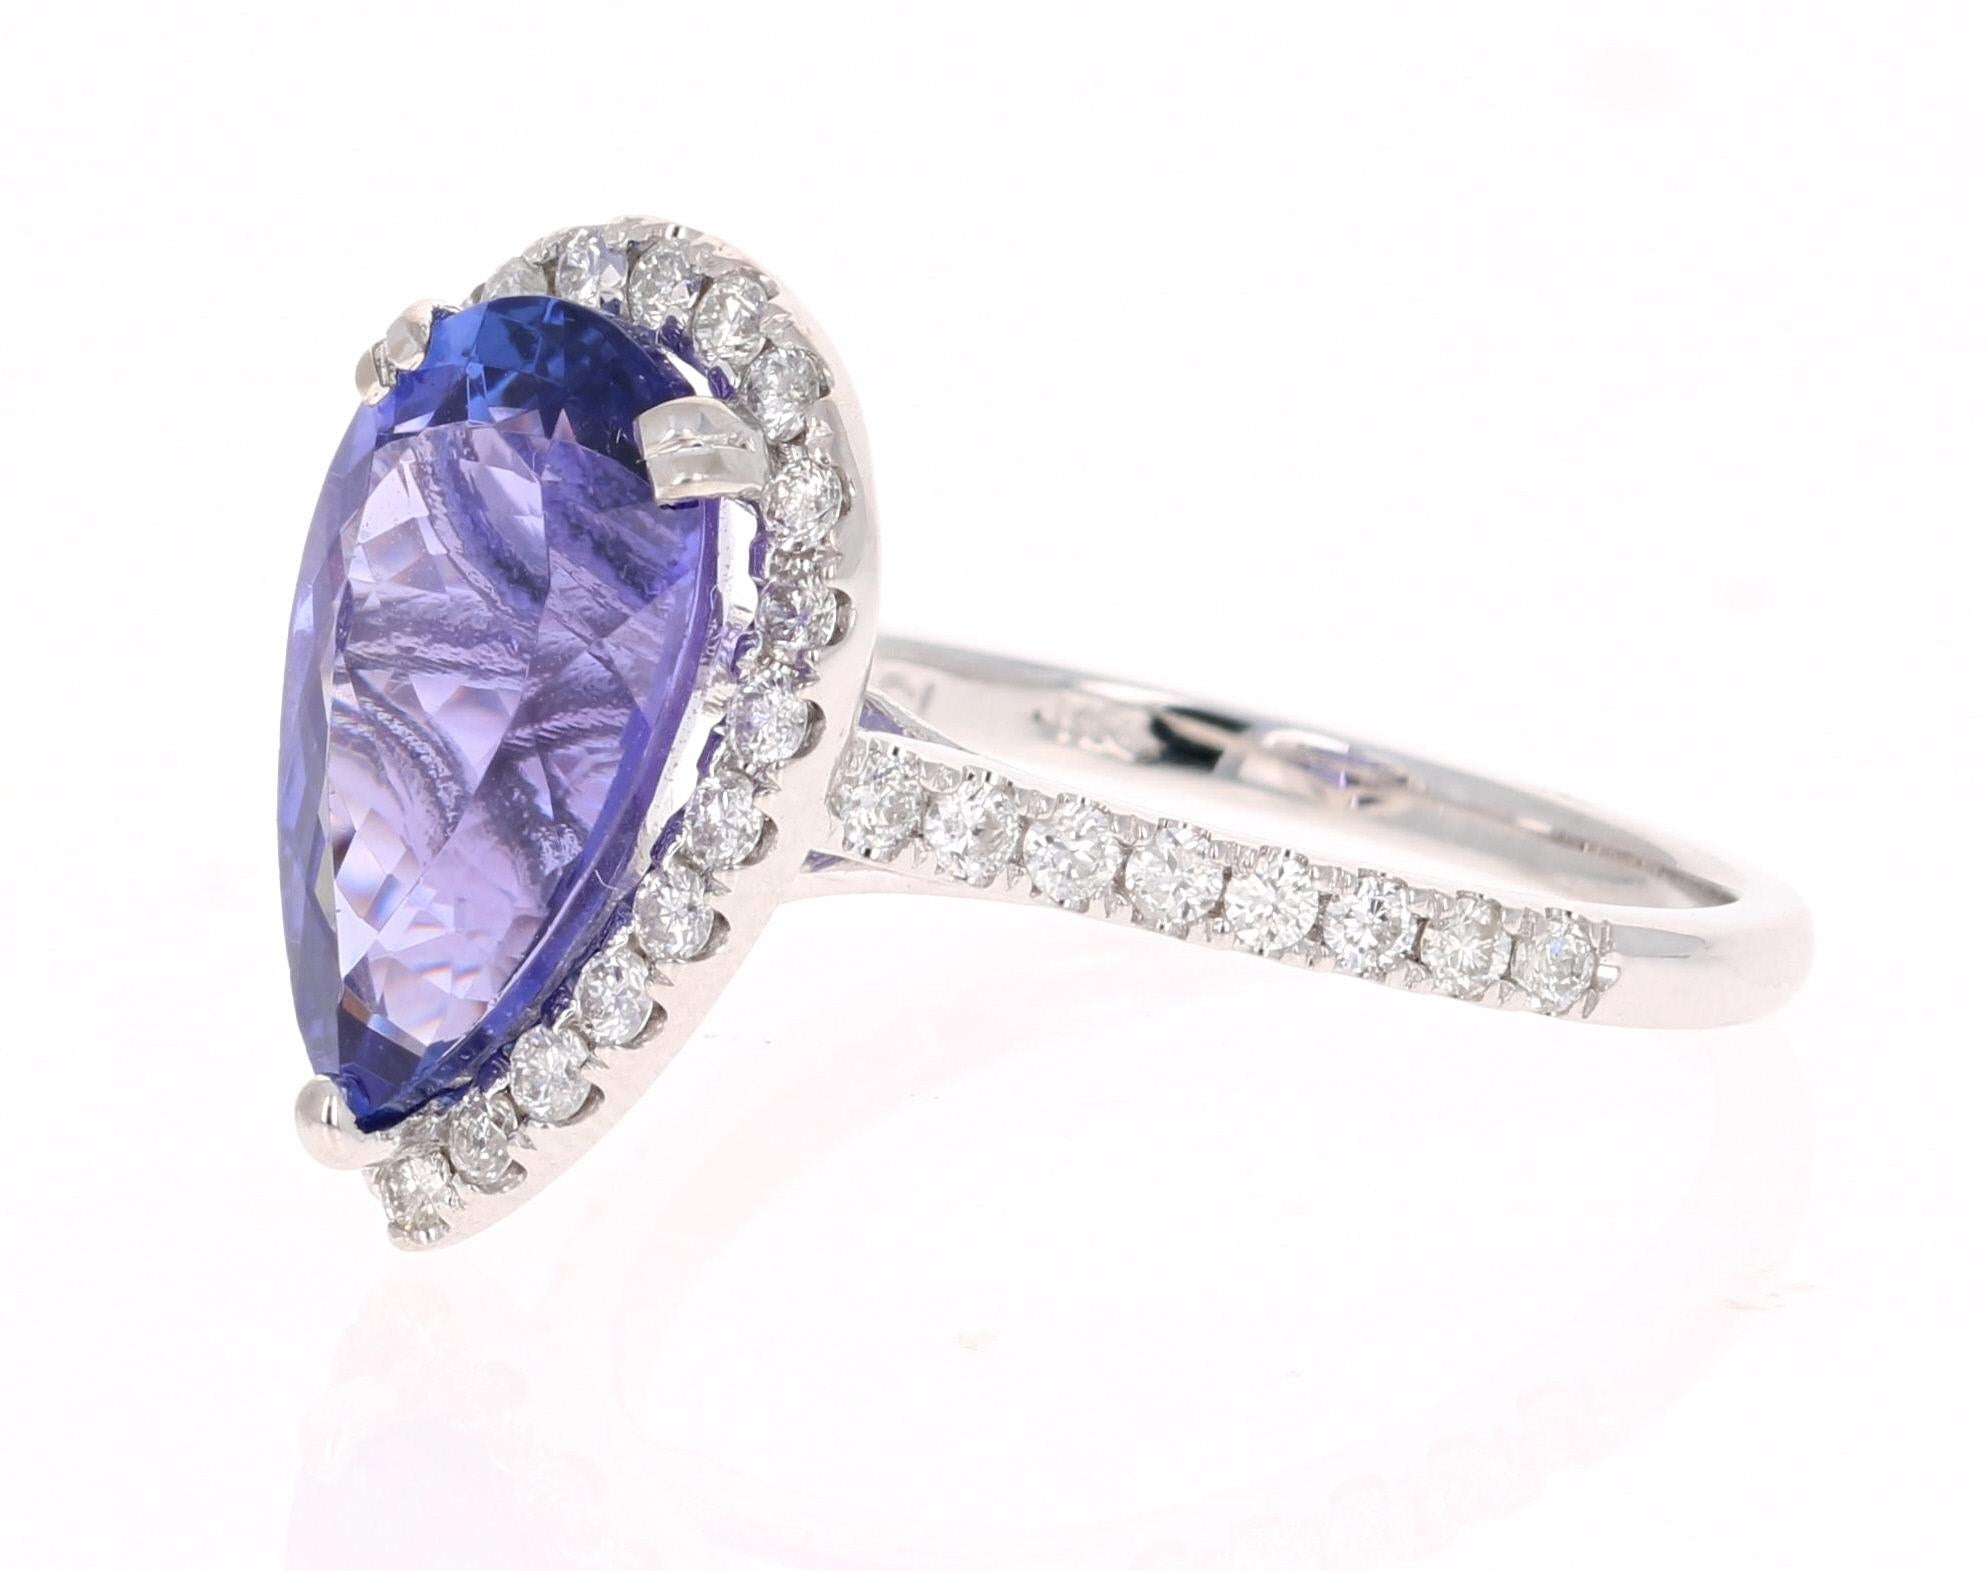 This ring has a electrifying Pear Cut bright purplish blue Tanzanite weighing 3.73 Carats. The traditional halo setting has 38 Round Cut Diamonds that weigh 0.51 carats which gently float around the Tanzanite. The total carat weight of the ring is